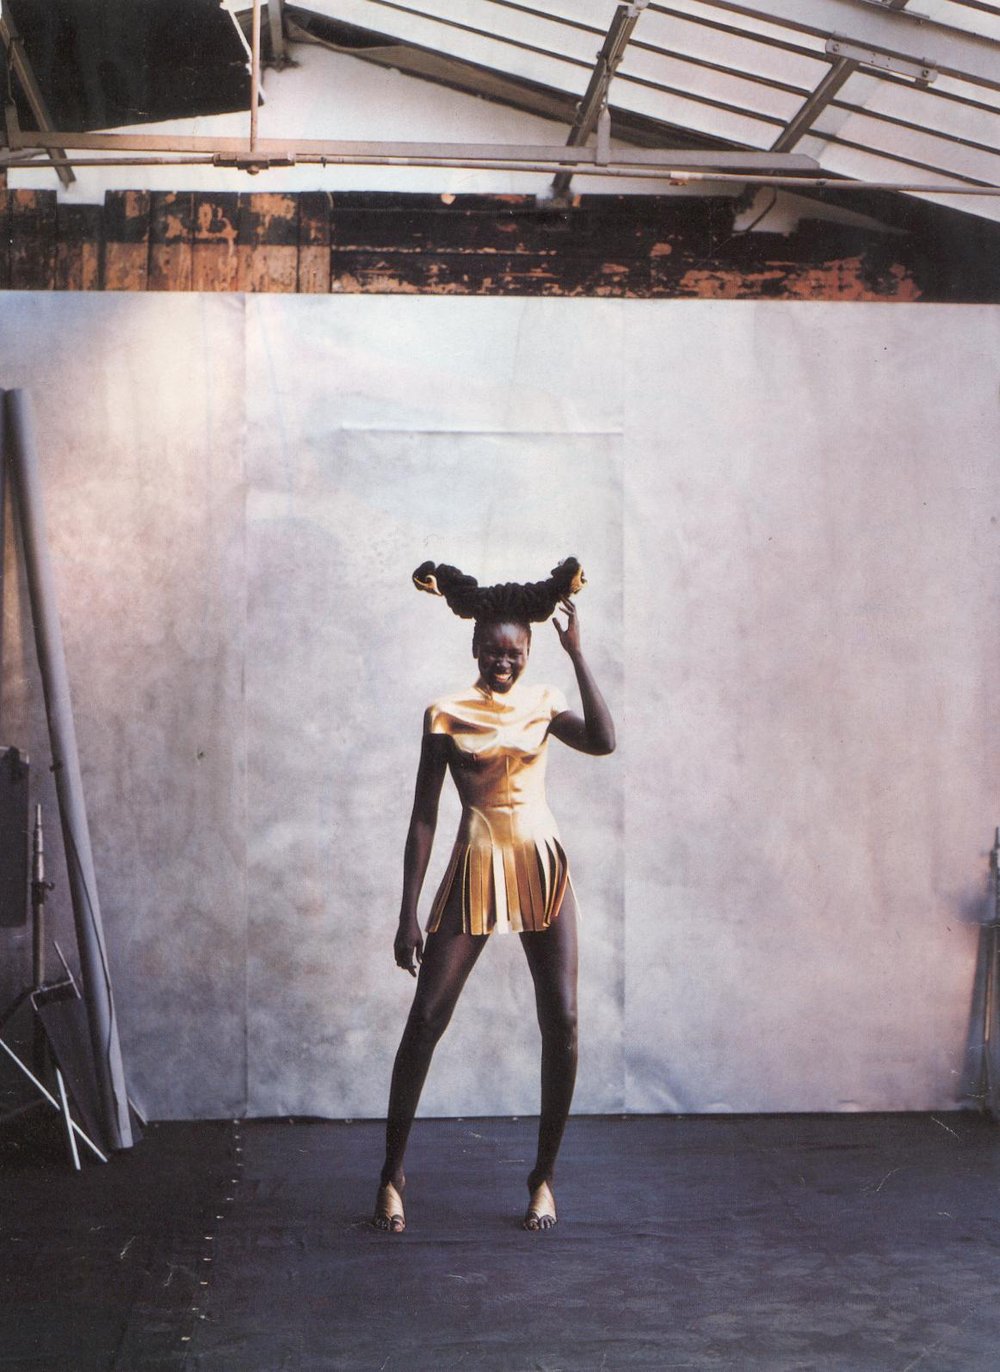 whitaker-malem-fashion-givenchy-couture-formed-leather-gold-centurian-breastplate-alexander-mcqueen-alek-wek-vogue-italia.jpg